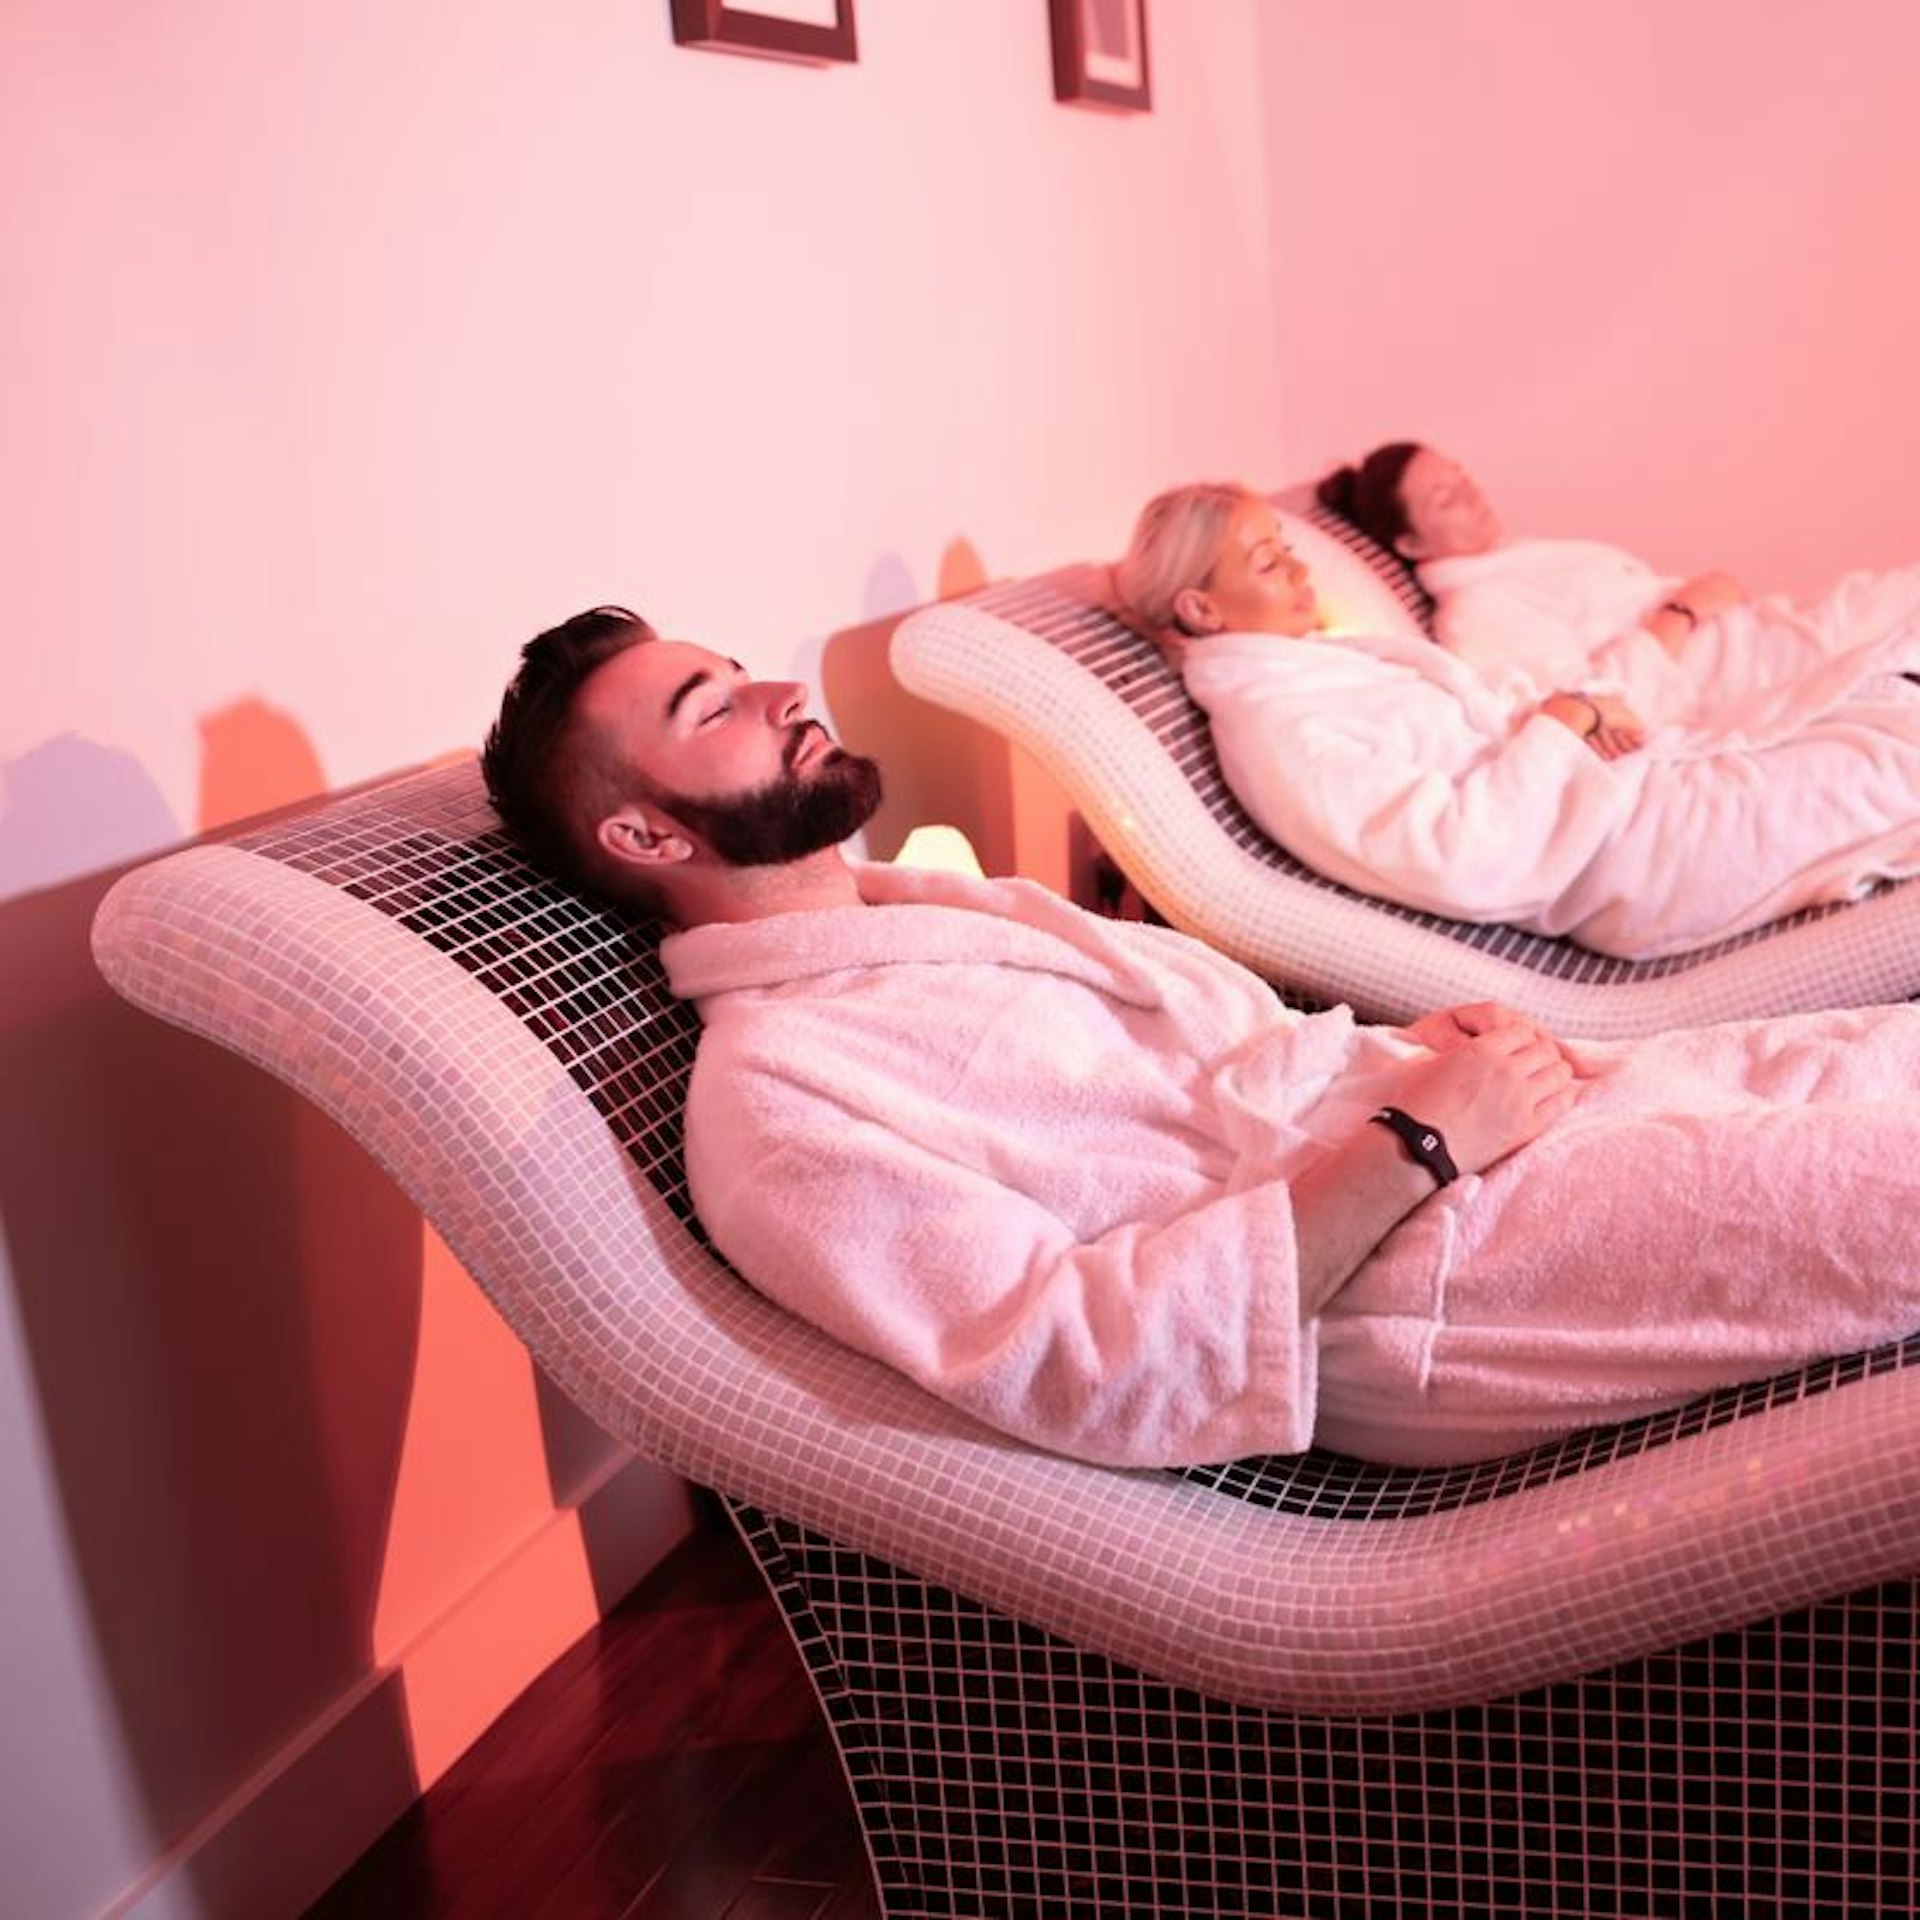 Spa Days for 2 - Couples Massage Packages - Virgin Experience Days